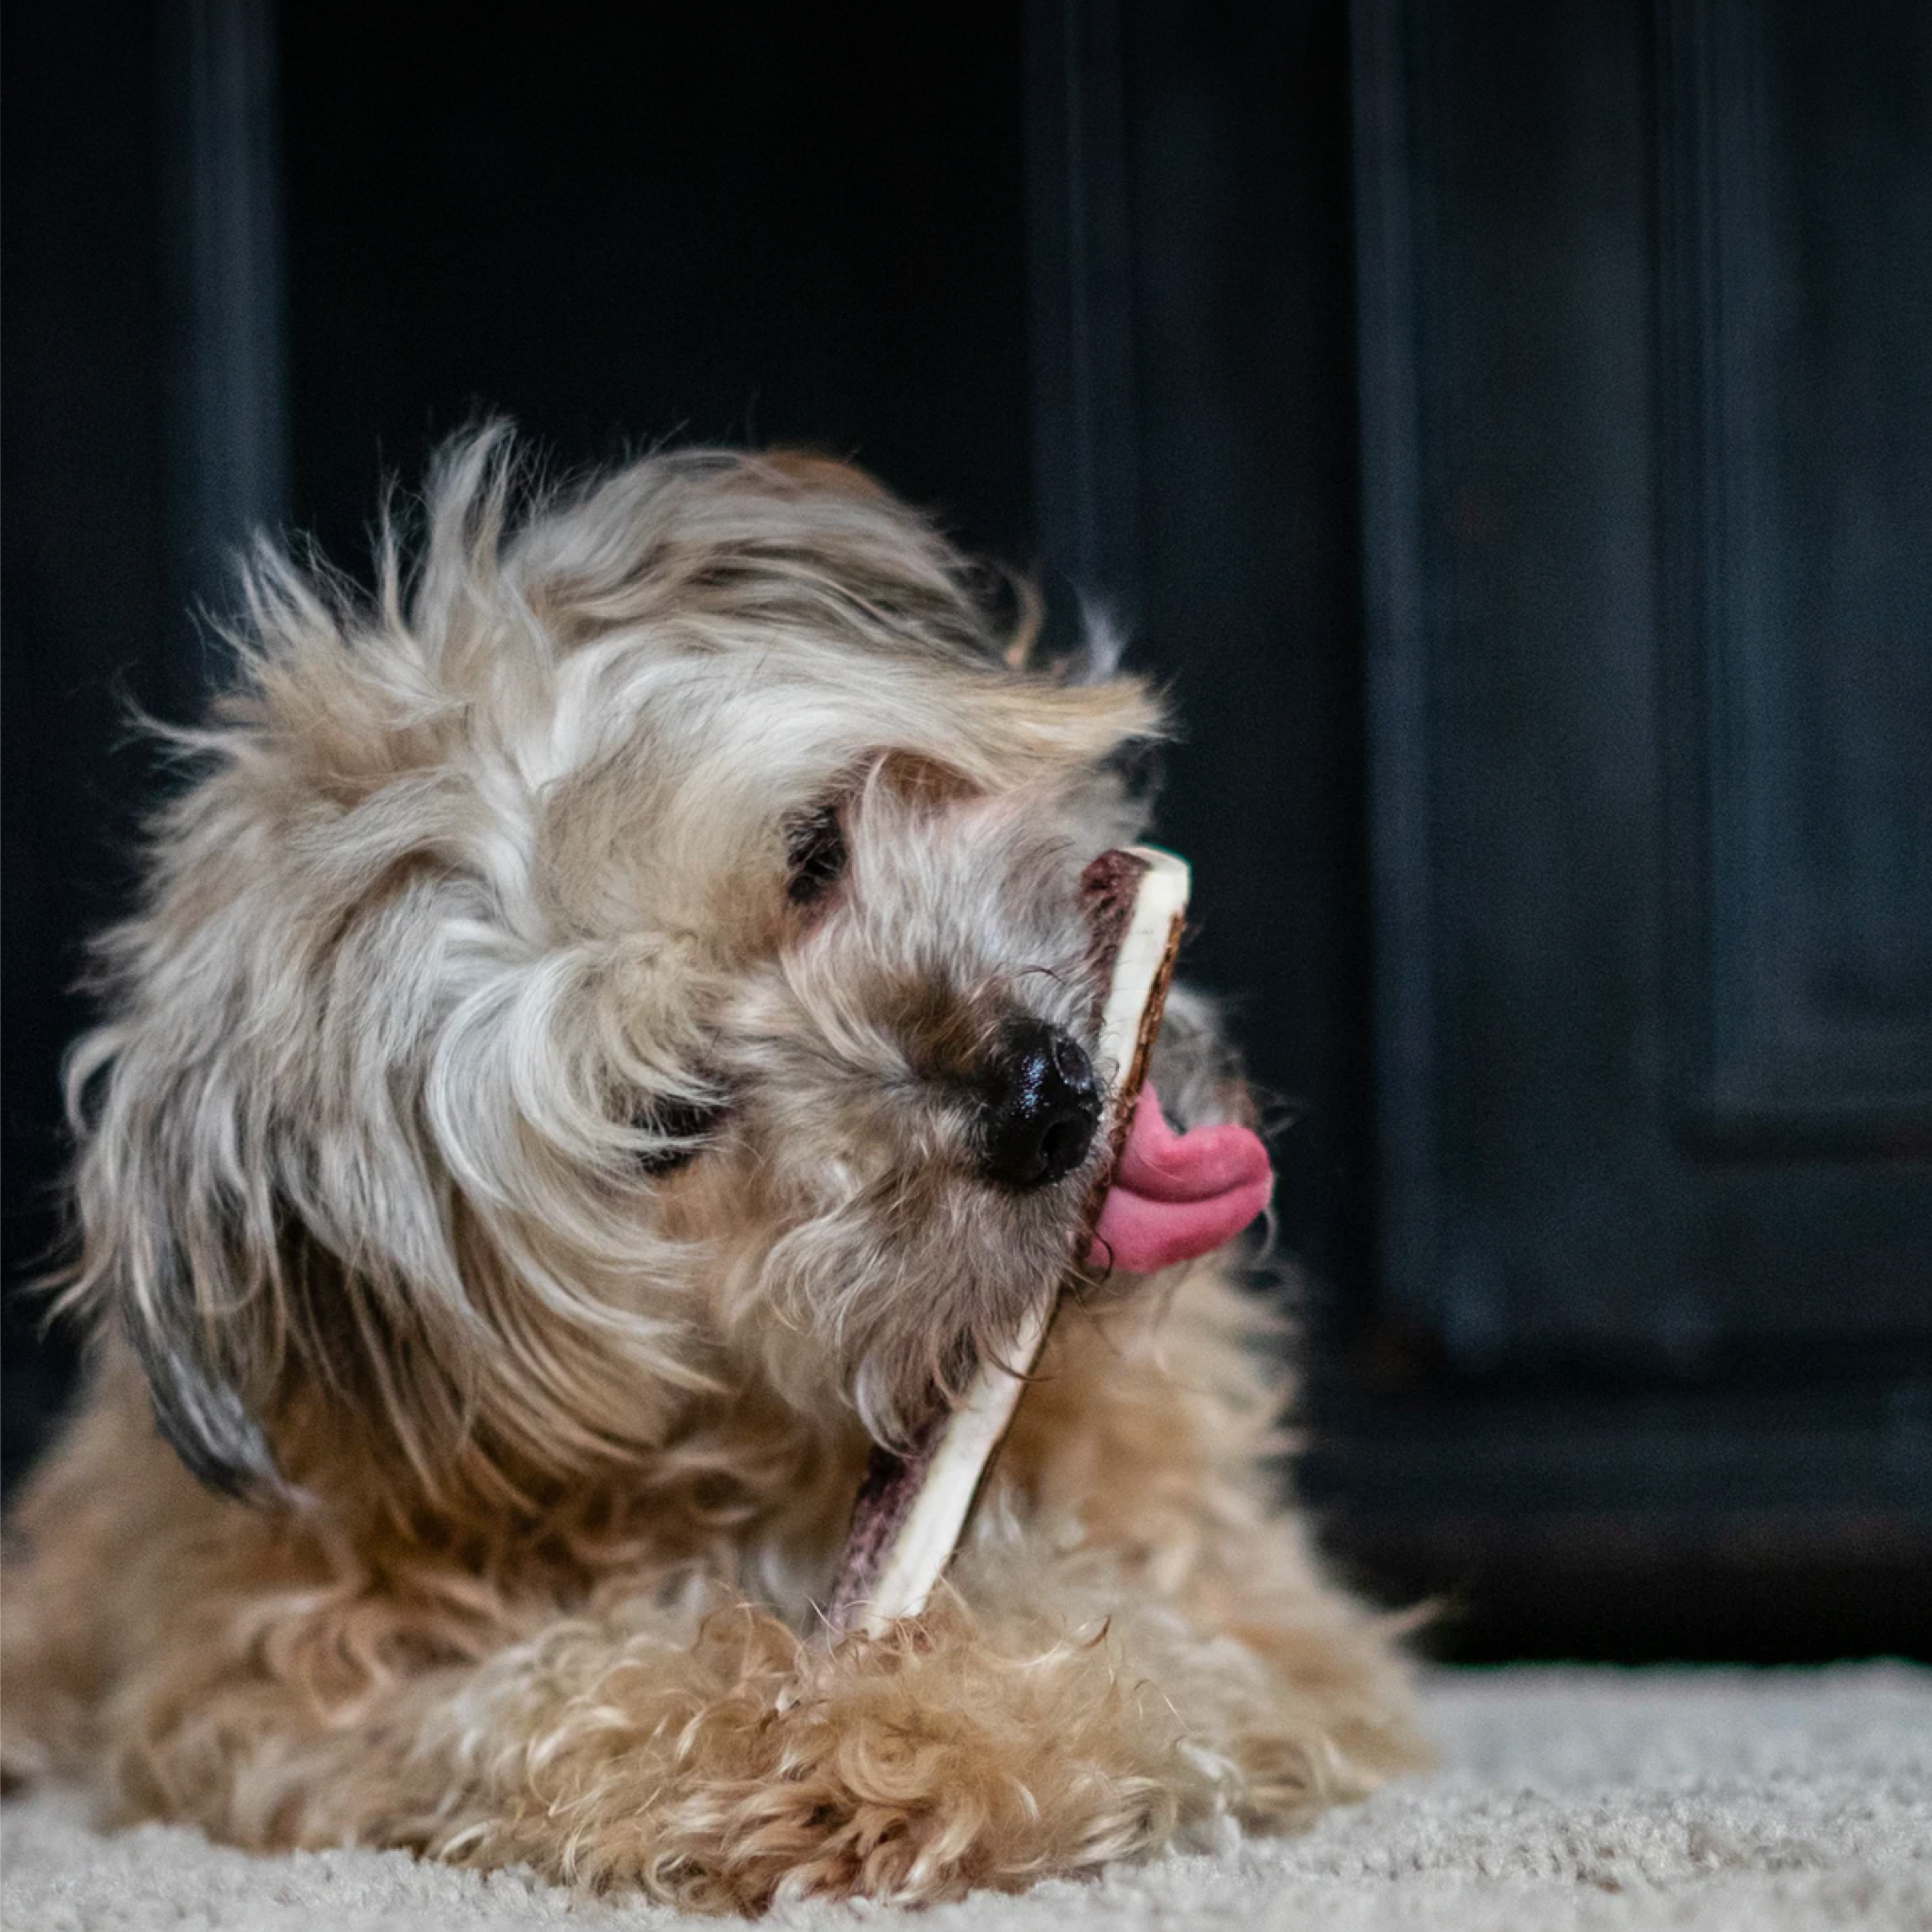 A mangy dog is shown laying on the carpet while chewing on a bone